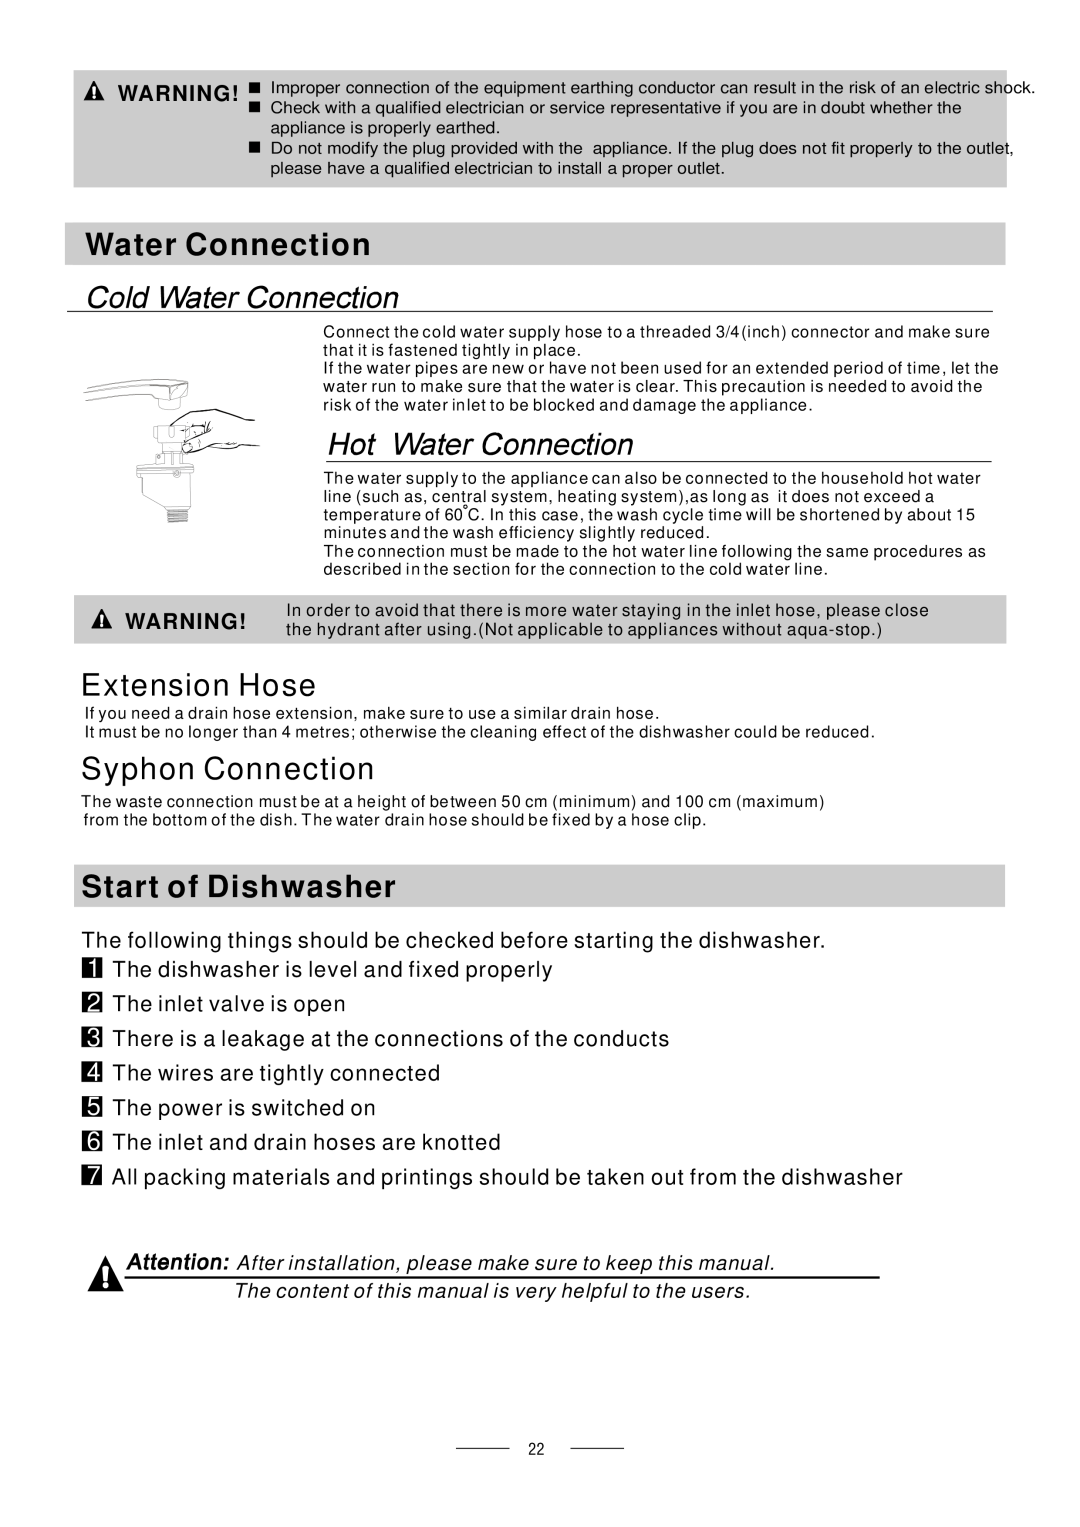 Whirlpool ADG 175 manual Water Connection, Extension Hose, Syphon Connection, Start of Dishwasher, for personal safety 